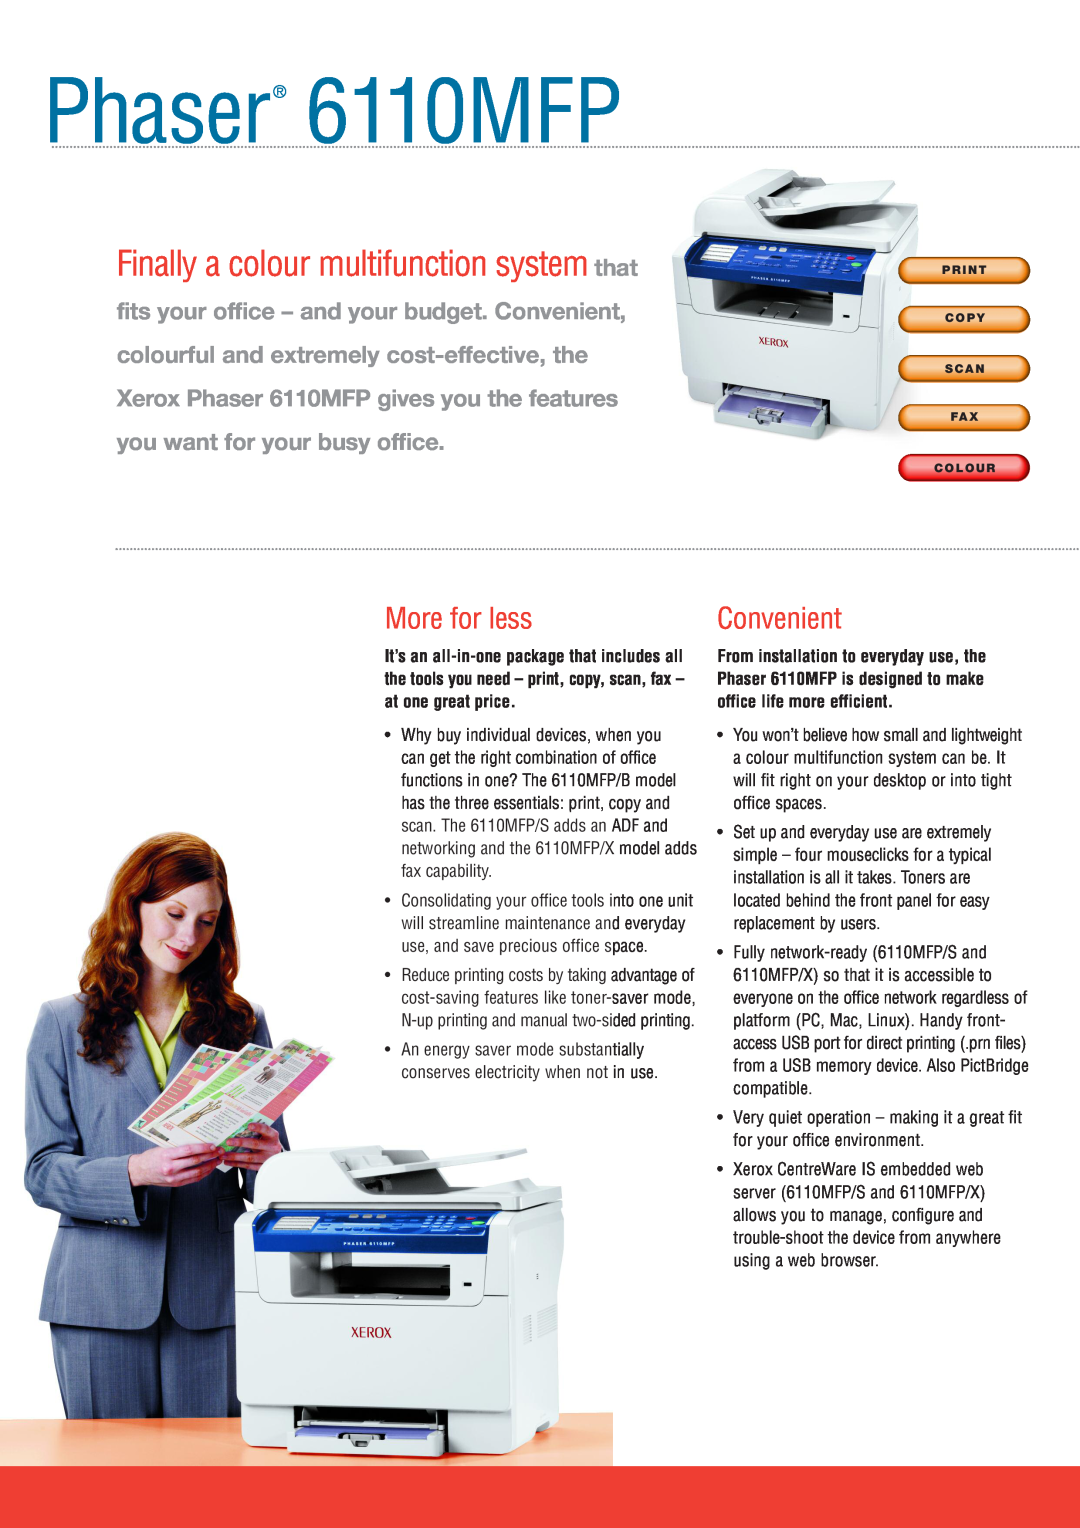 Xerox manual Phaser 6110MFP, Finally a colour multifunction system that, More for less, Convenient, at one great price 